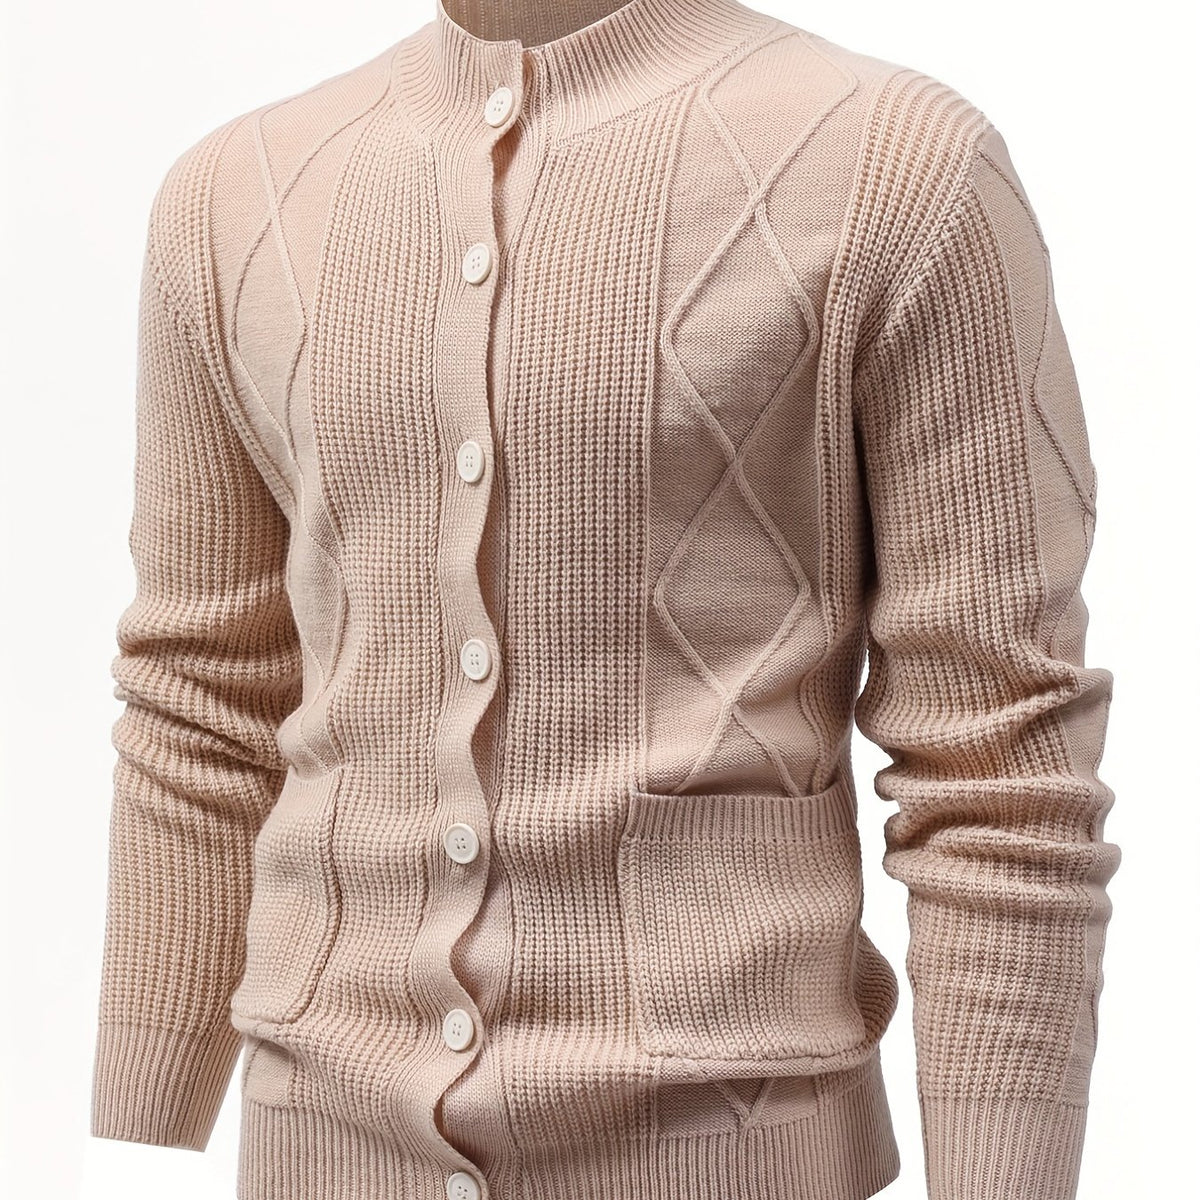 Men's Casual Vintage Style Cable Sweater Button Up Cardigan